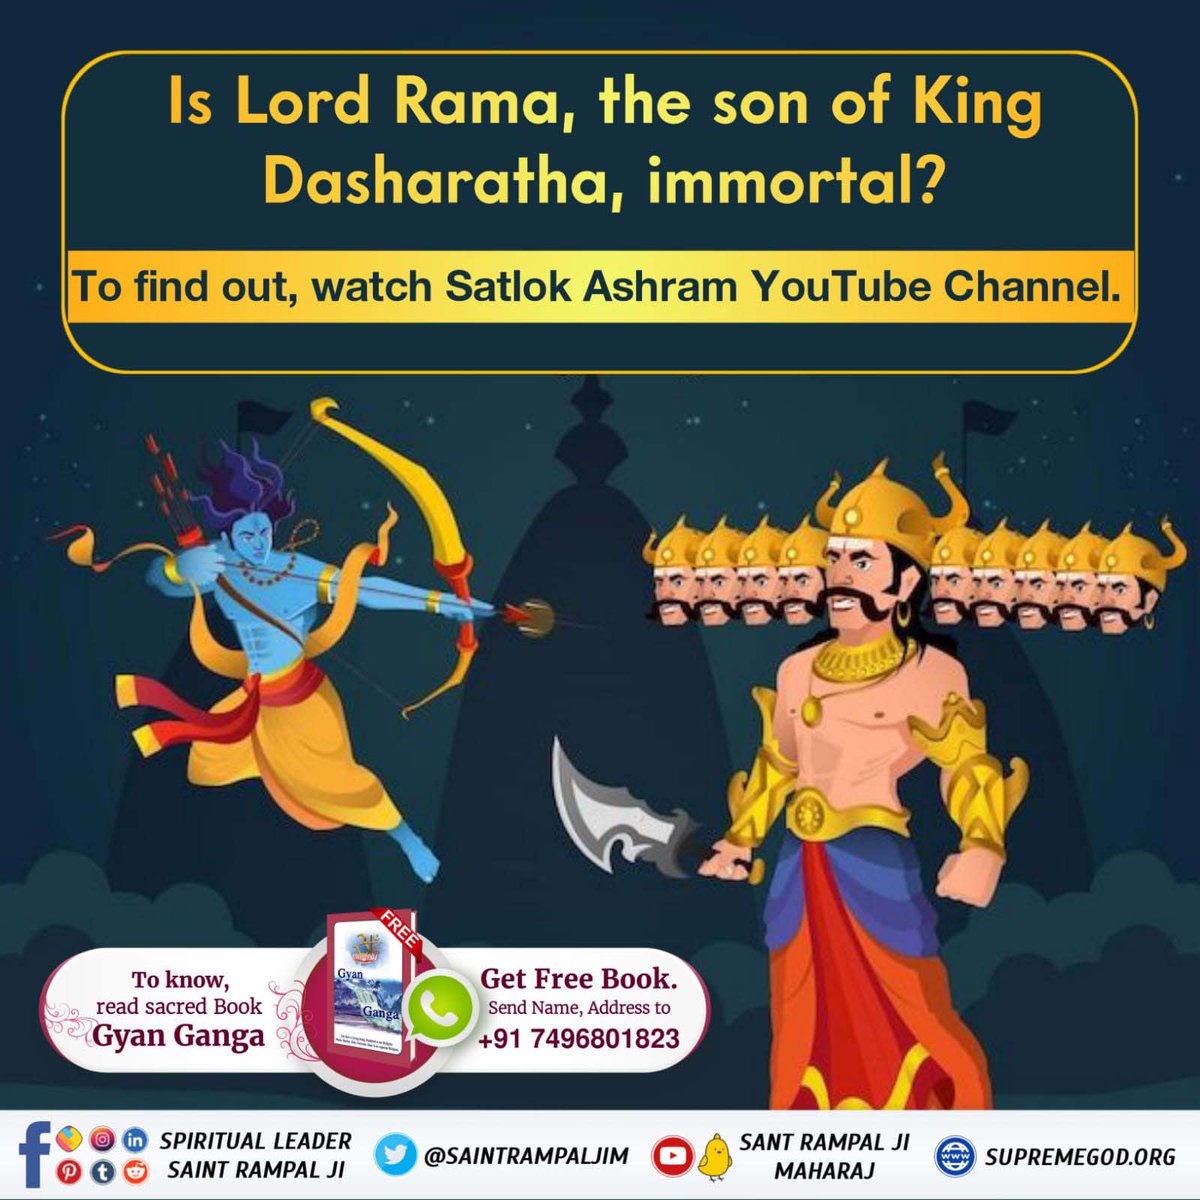 #SpiritualMessageOnDussehra Everyone remembers Ram, but no one knows who the real Ram is. To know, watch Sadhna Channel at 7.30pm. – Sant Rampal Ji Maharaj